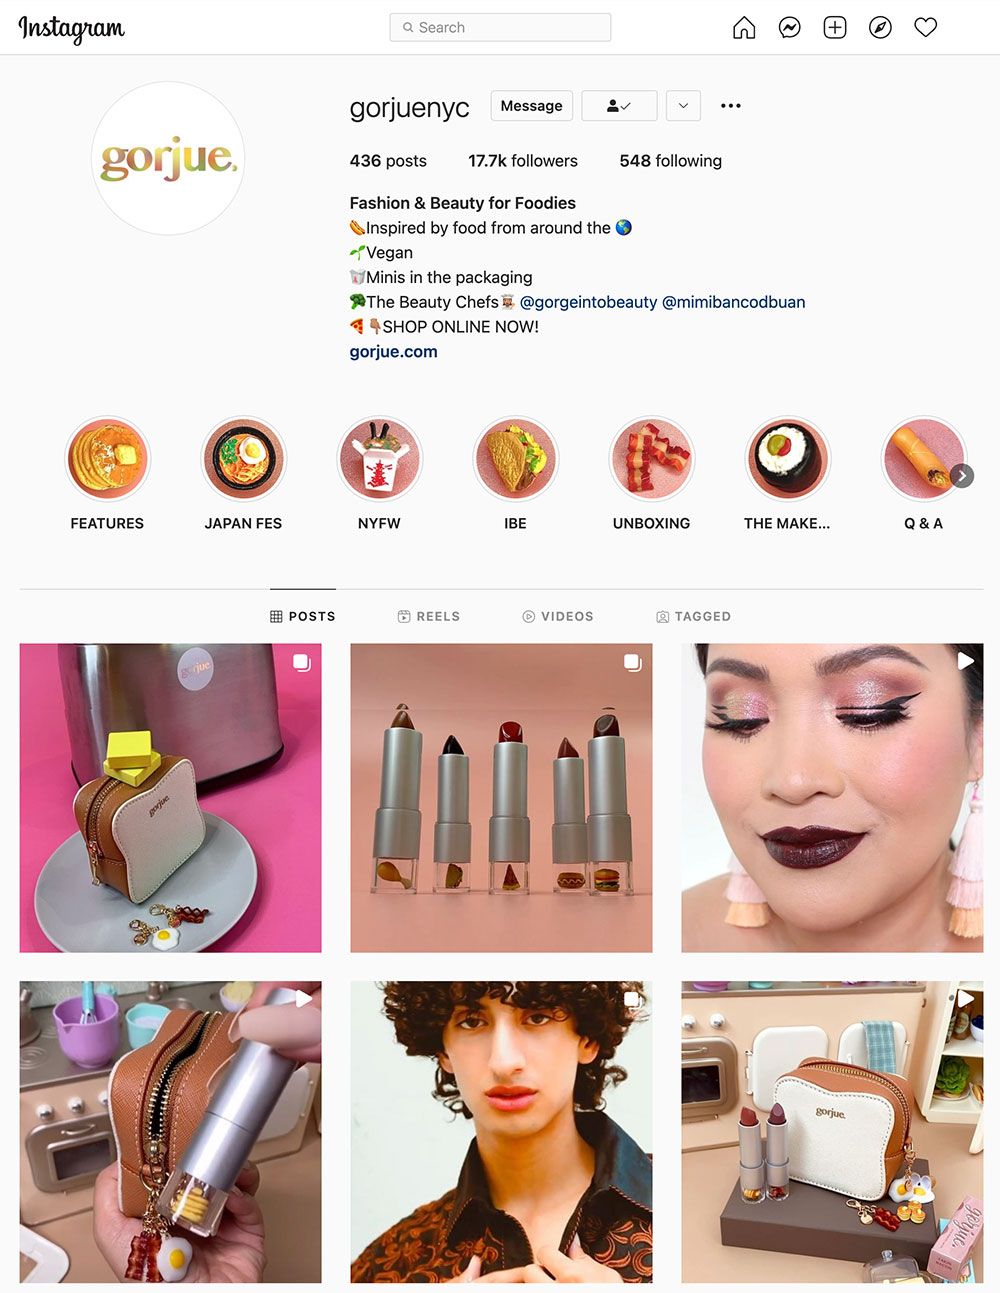 The Instagram account of Gorjue, displaying their lipstick based on food. Images have tubes of lipstick with a makeup bag shaped like toast with egg and bacon keychains.